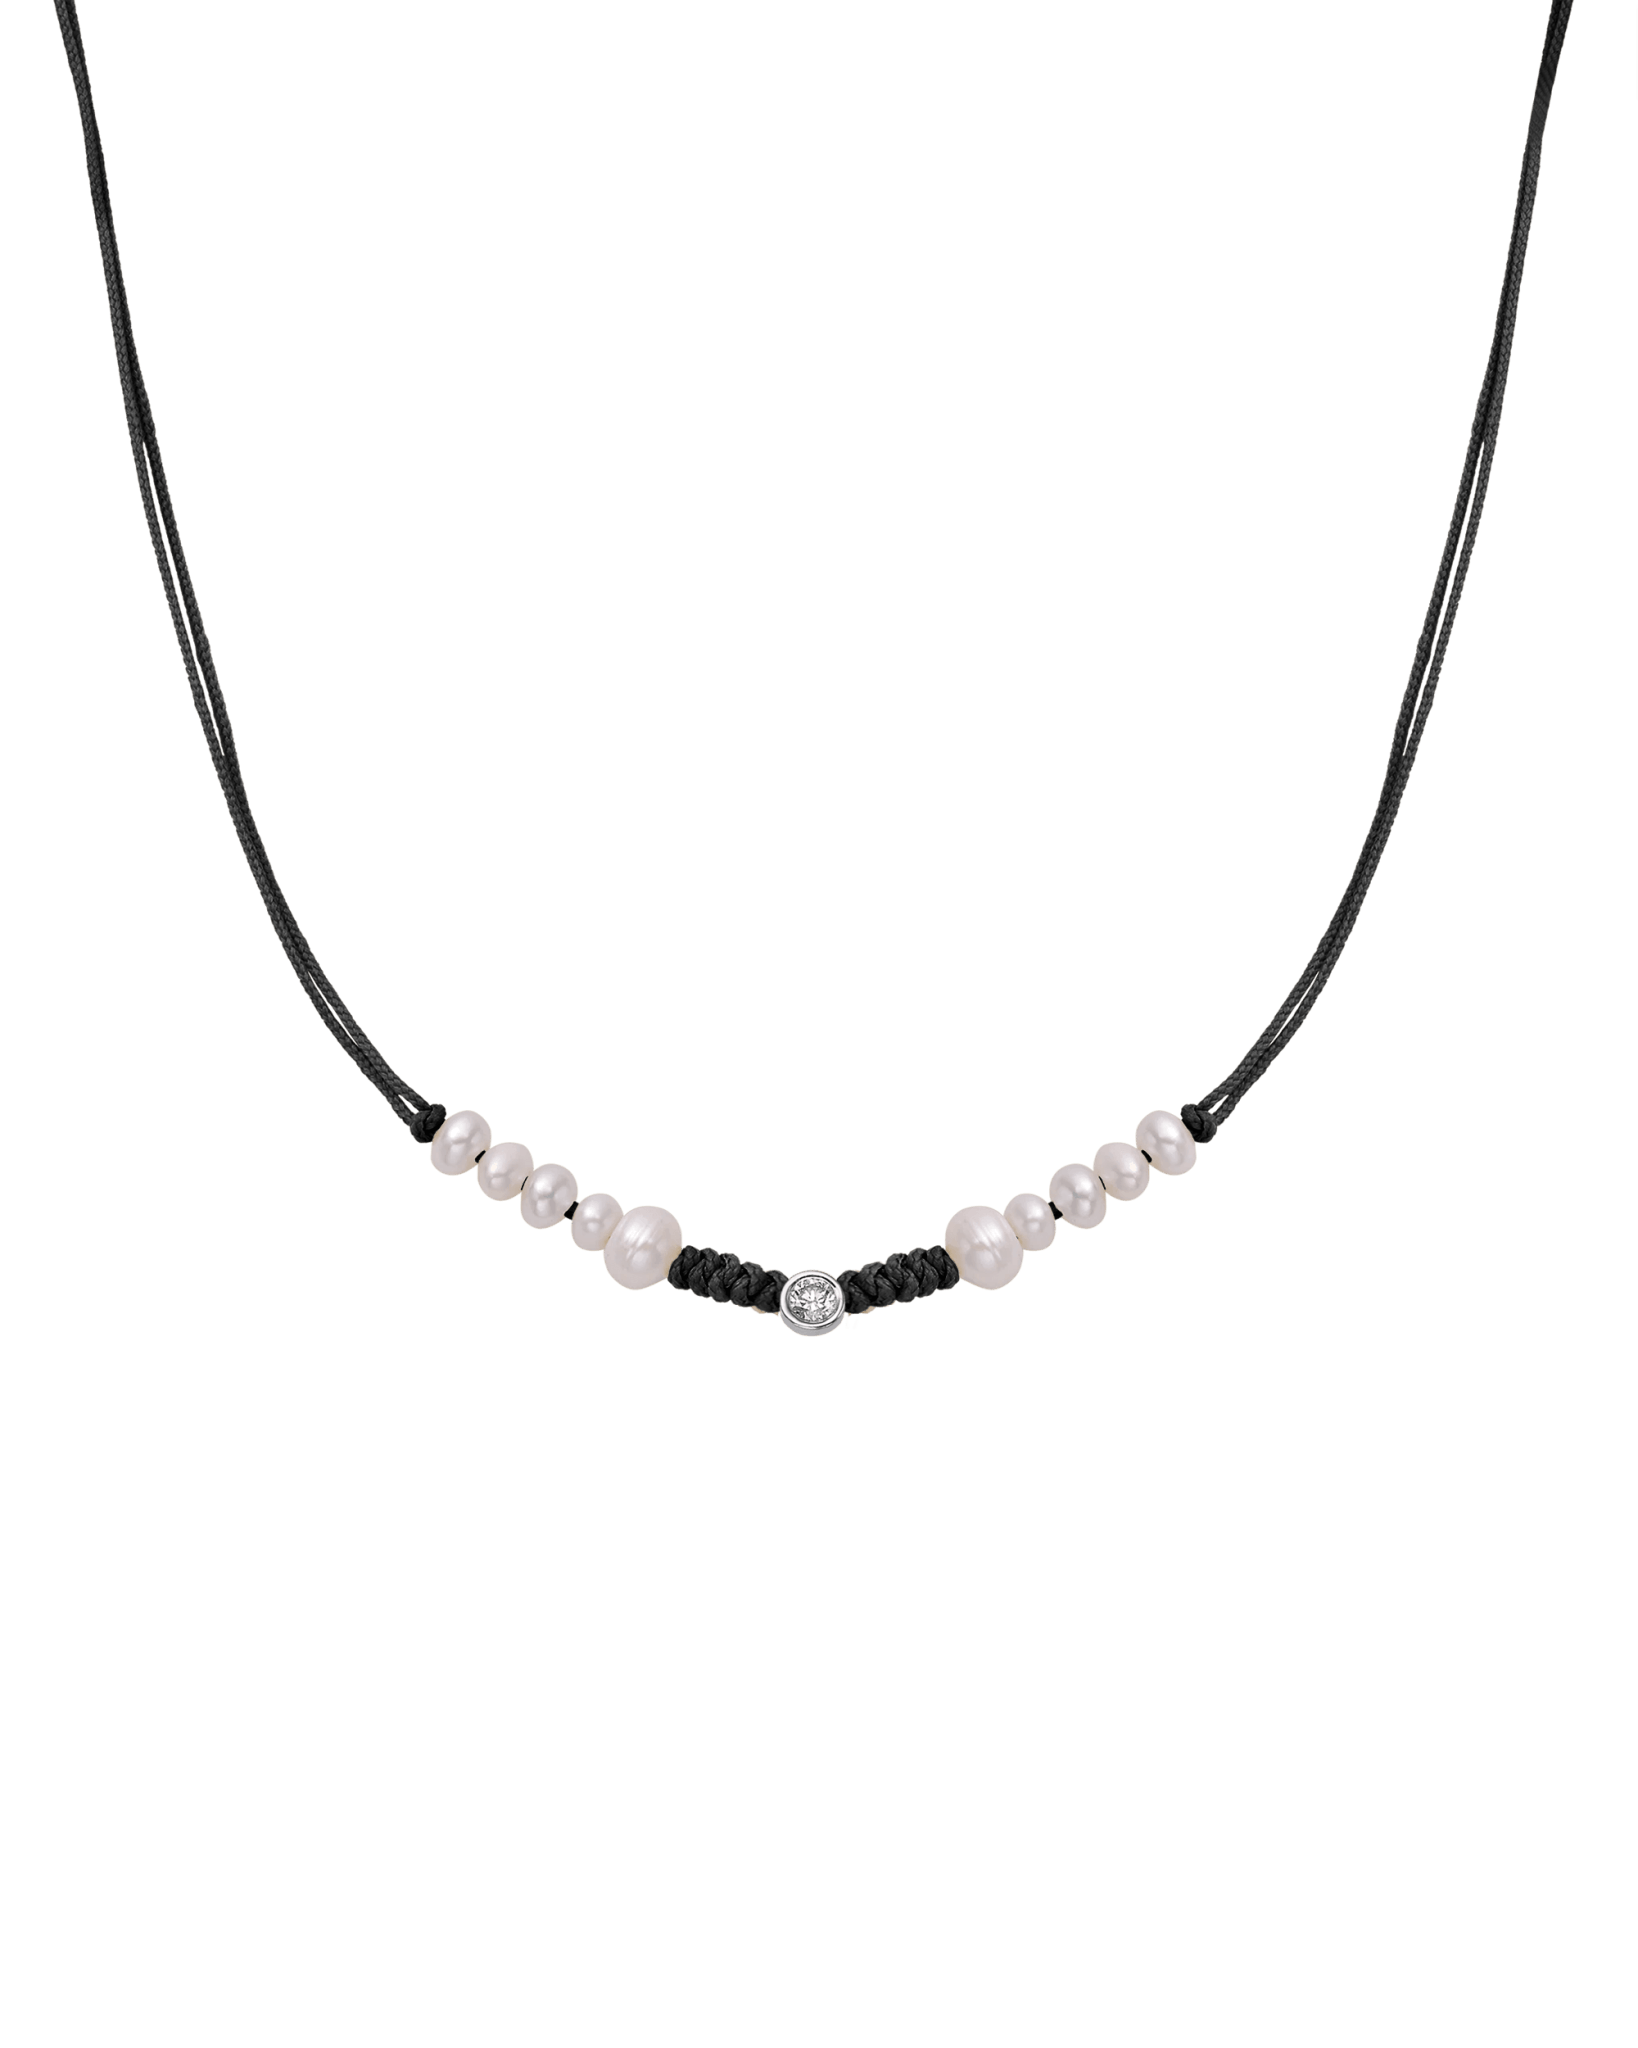 Ten Natural Pearl String of Love Necklace - 14K White Gold Necklaces 14K Solid Gold Black Large: 0.1ct 